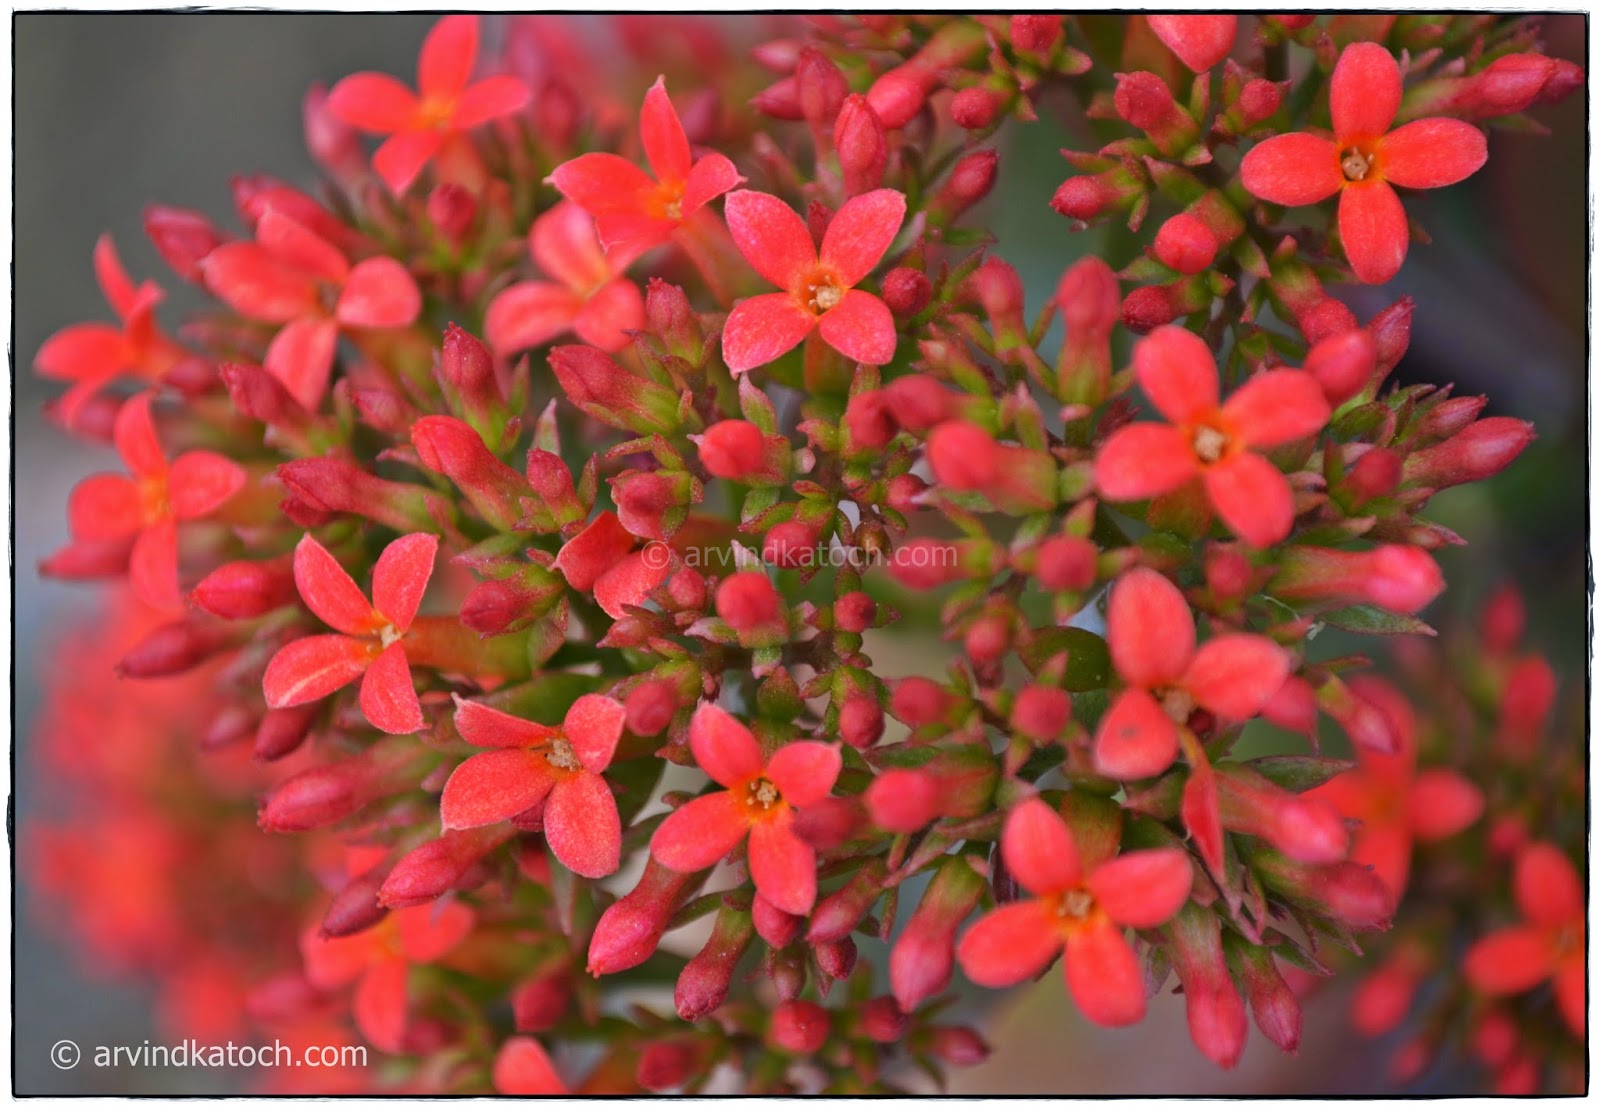 Tiny Red Flowers, Red Flowers, Red